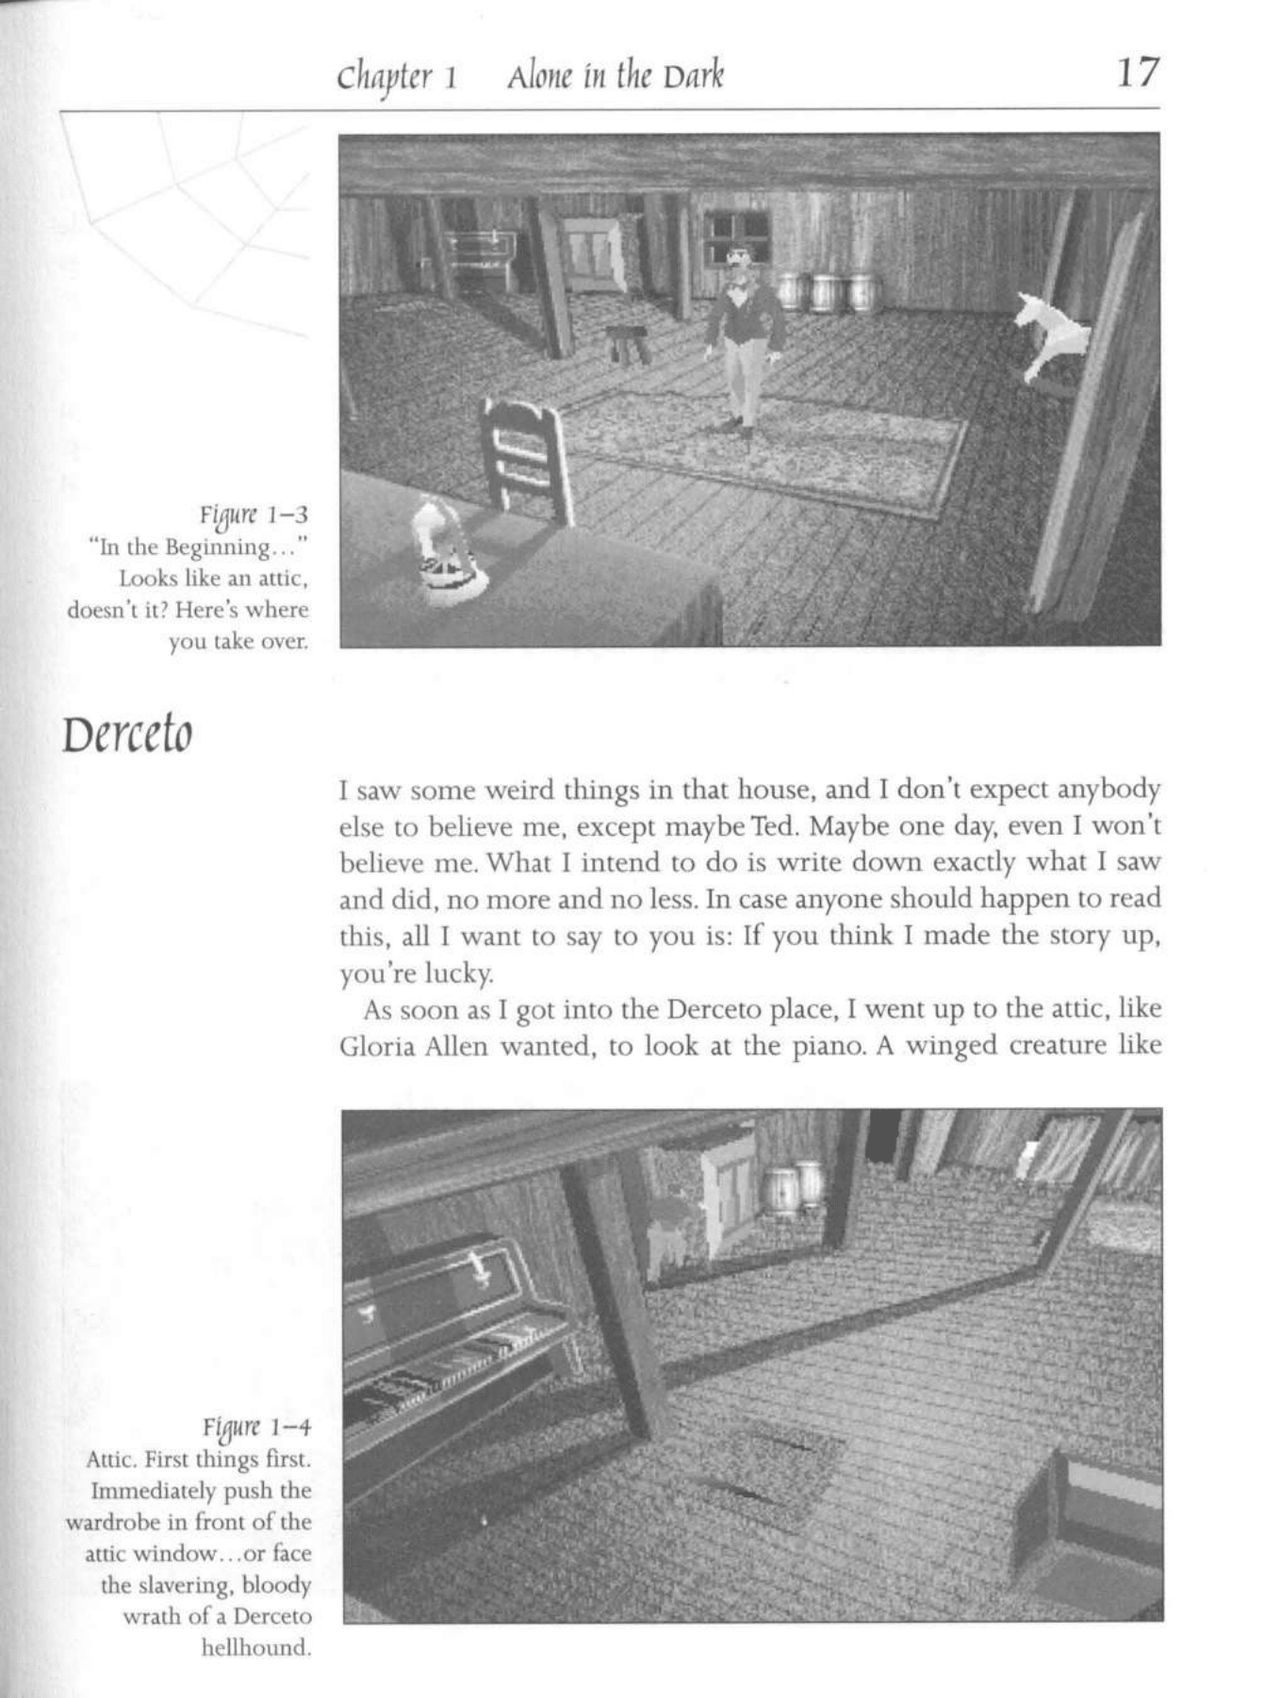 Alone in the Dark 1 and 2 Strategy Guide 29